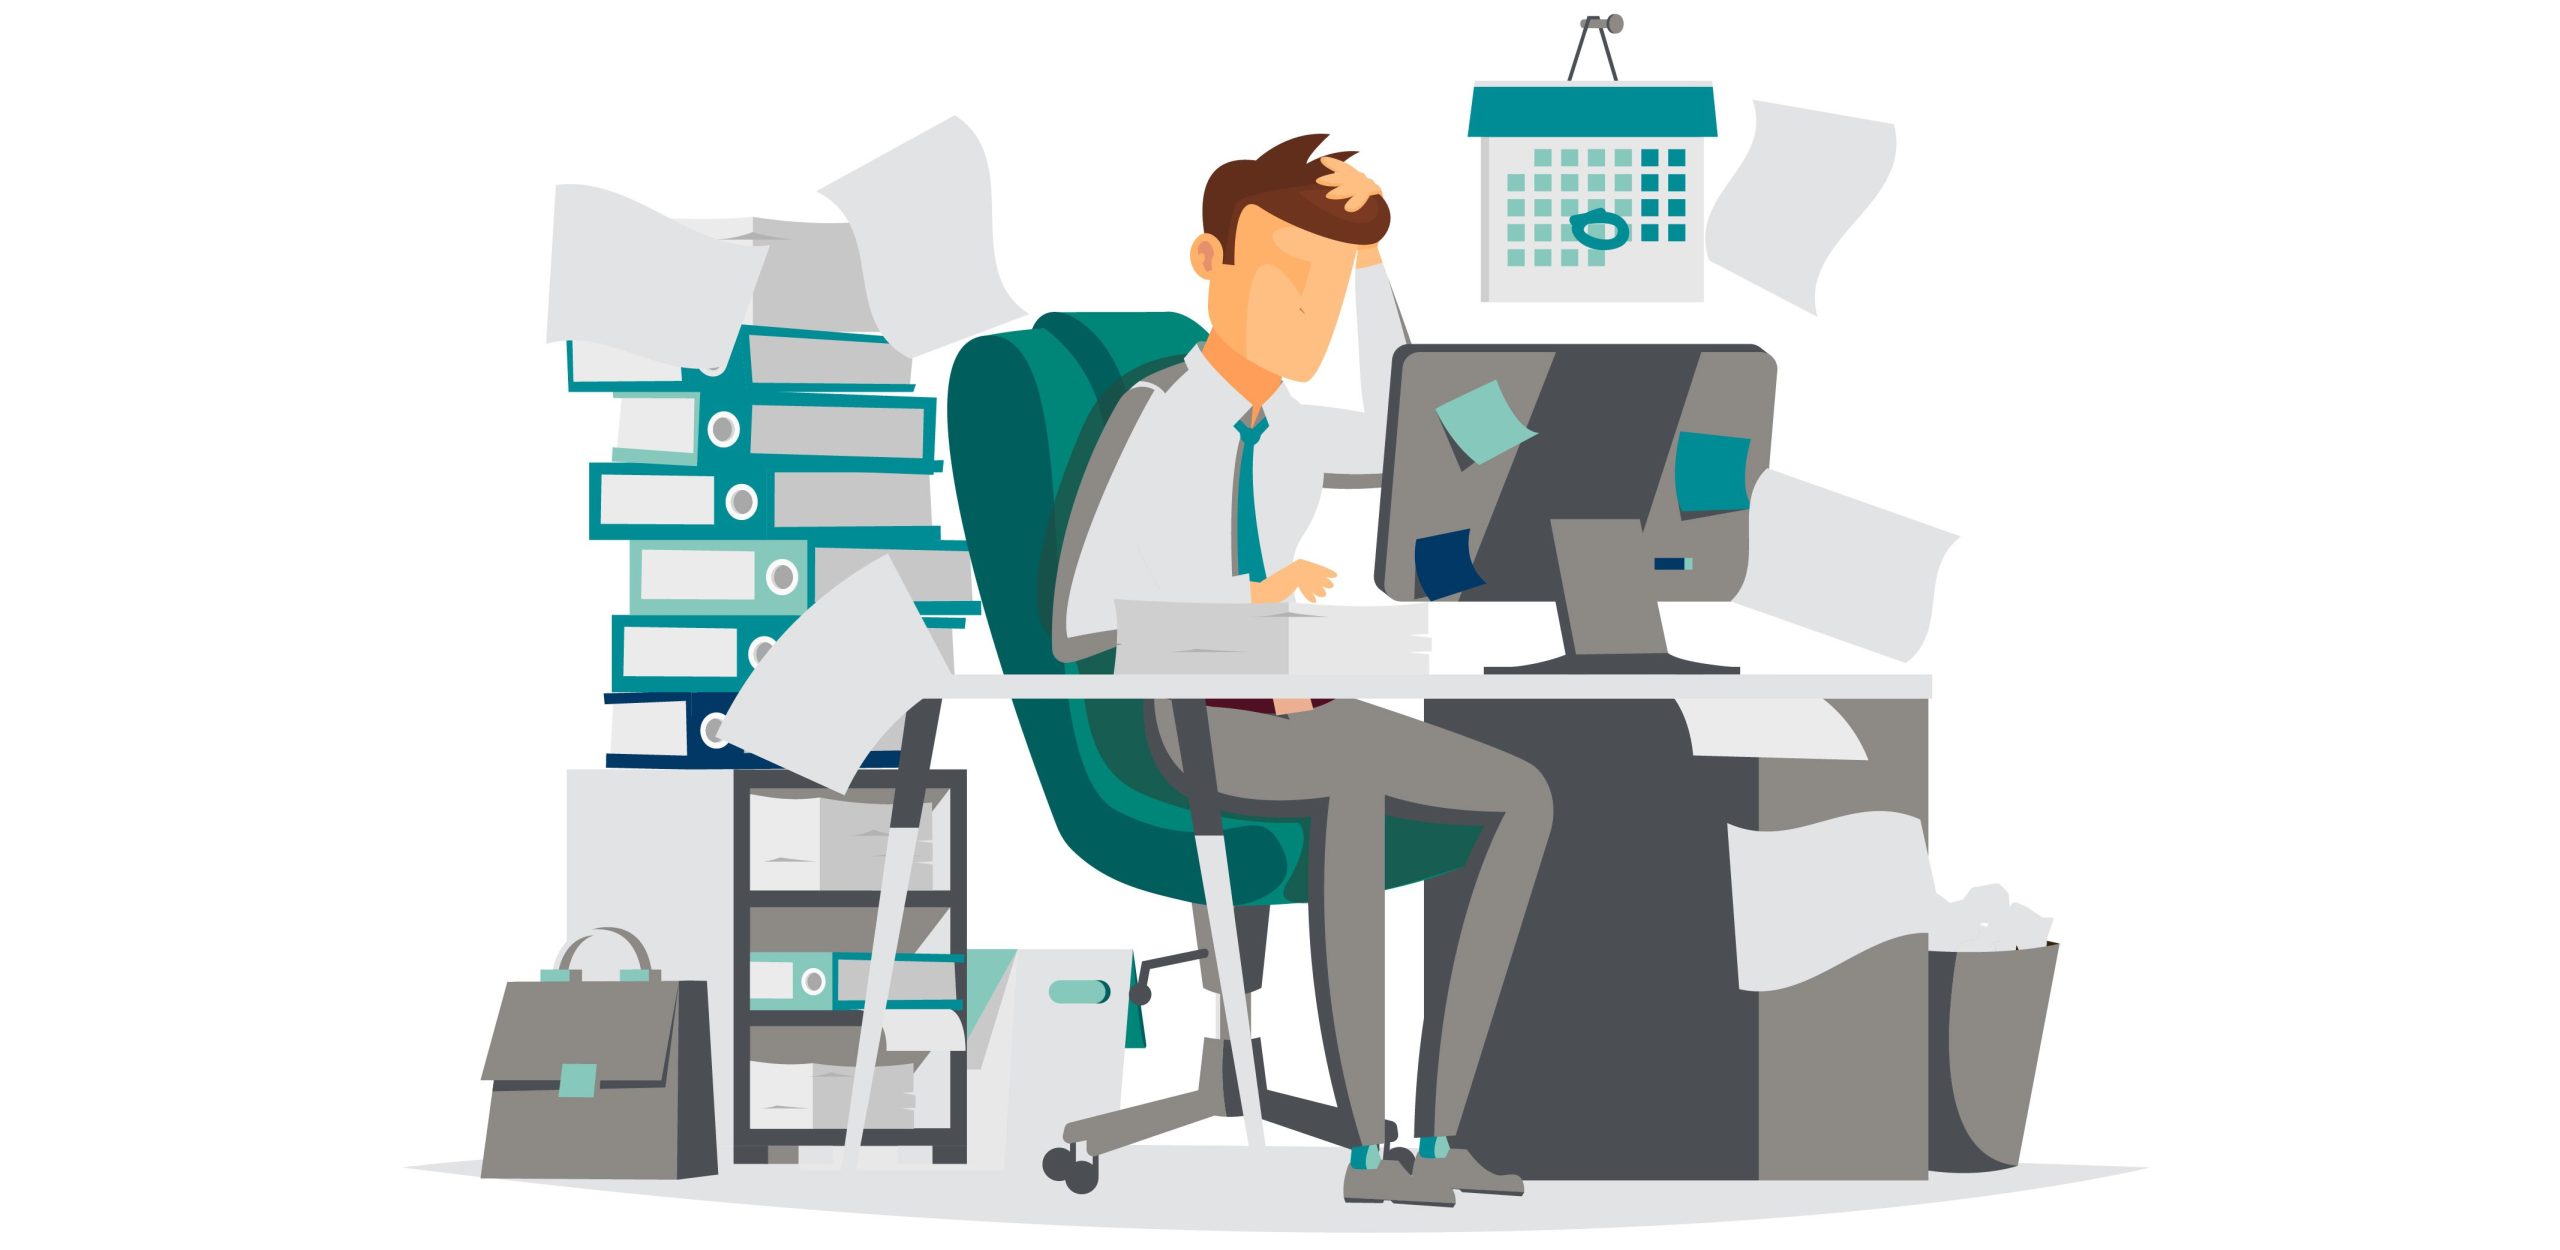 A poor system of task management can quickly overwhelm the accounting team.